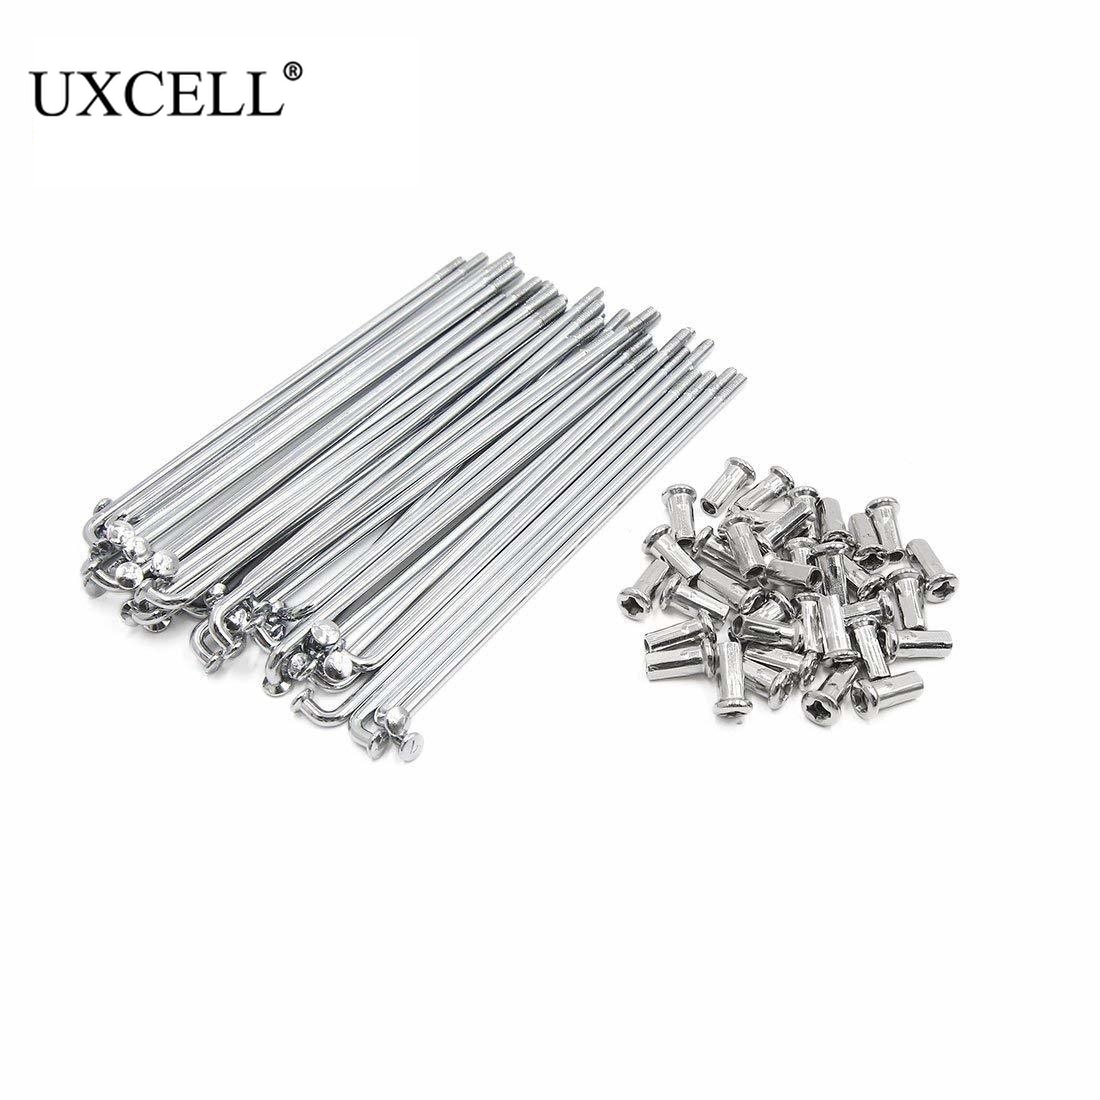 Uxcell 36pcs 72pcs 4mm Thread Diameter 150mm-170mm Length Motorcycle Wheel Spokes With Nipples